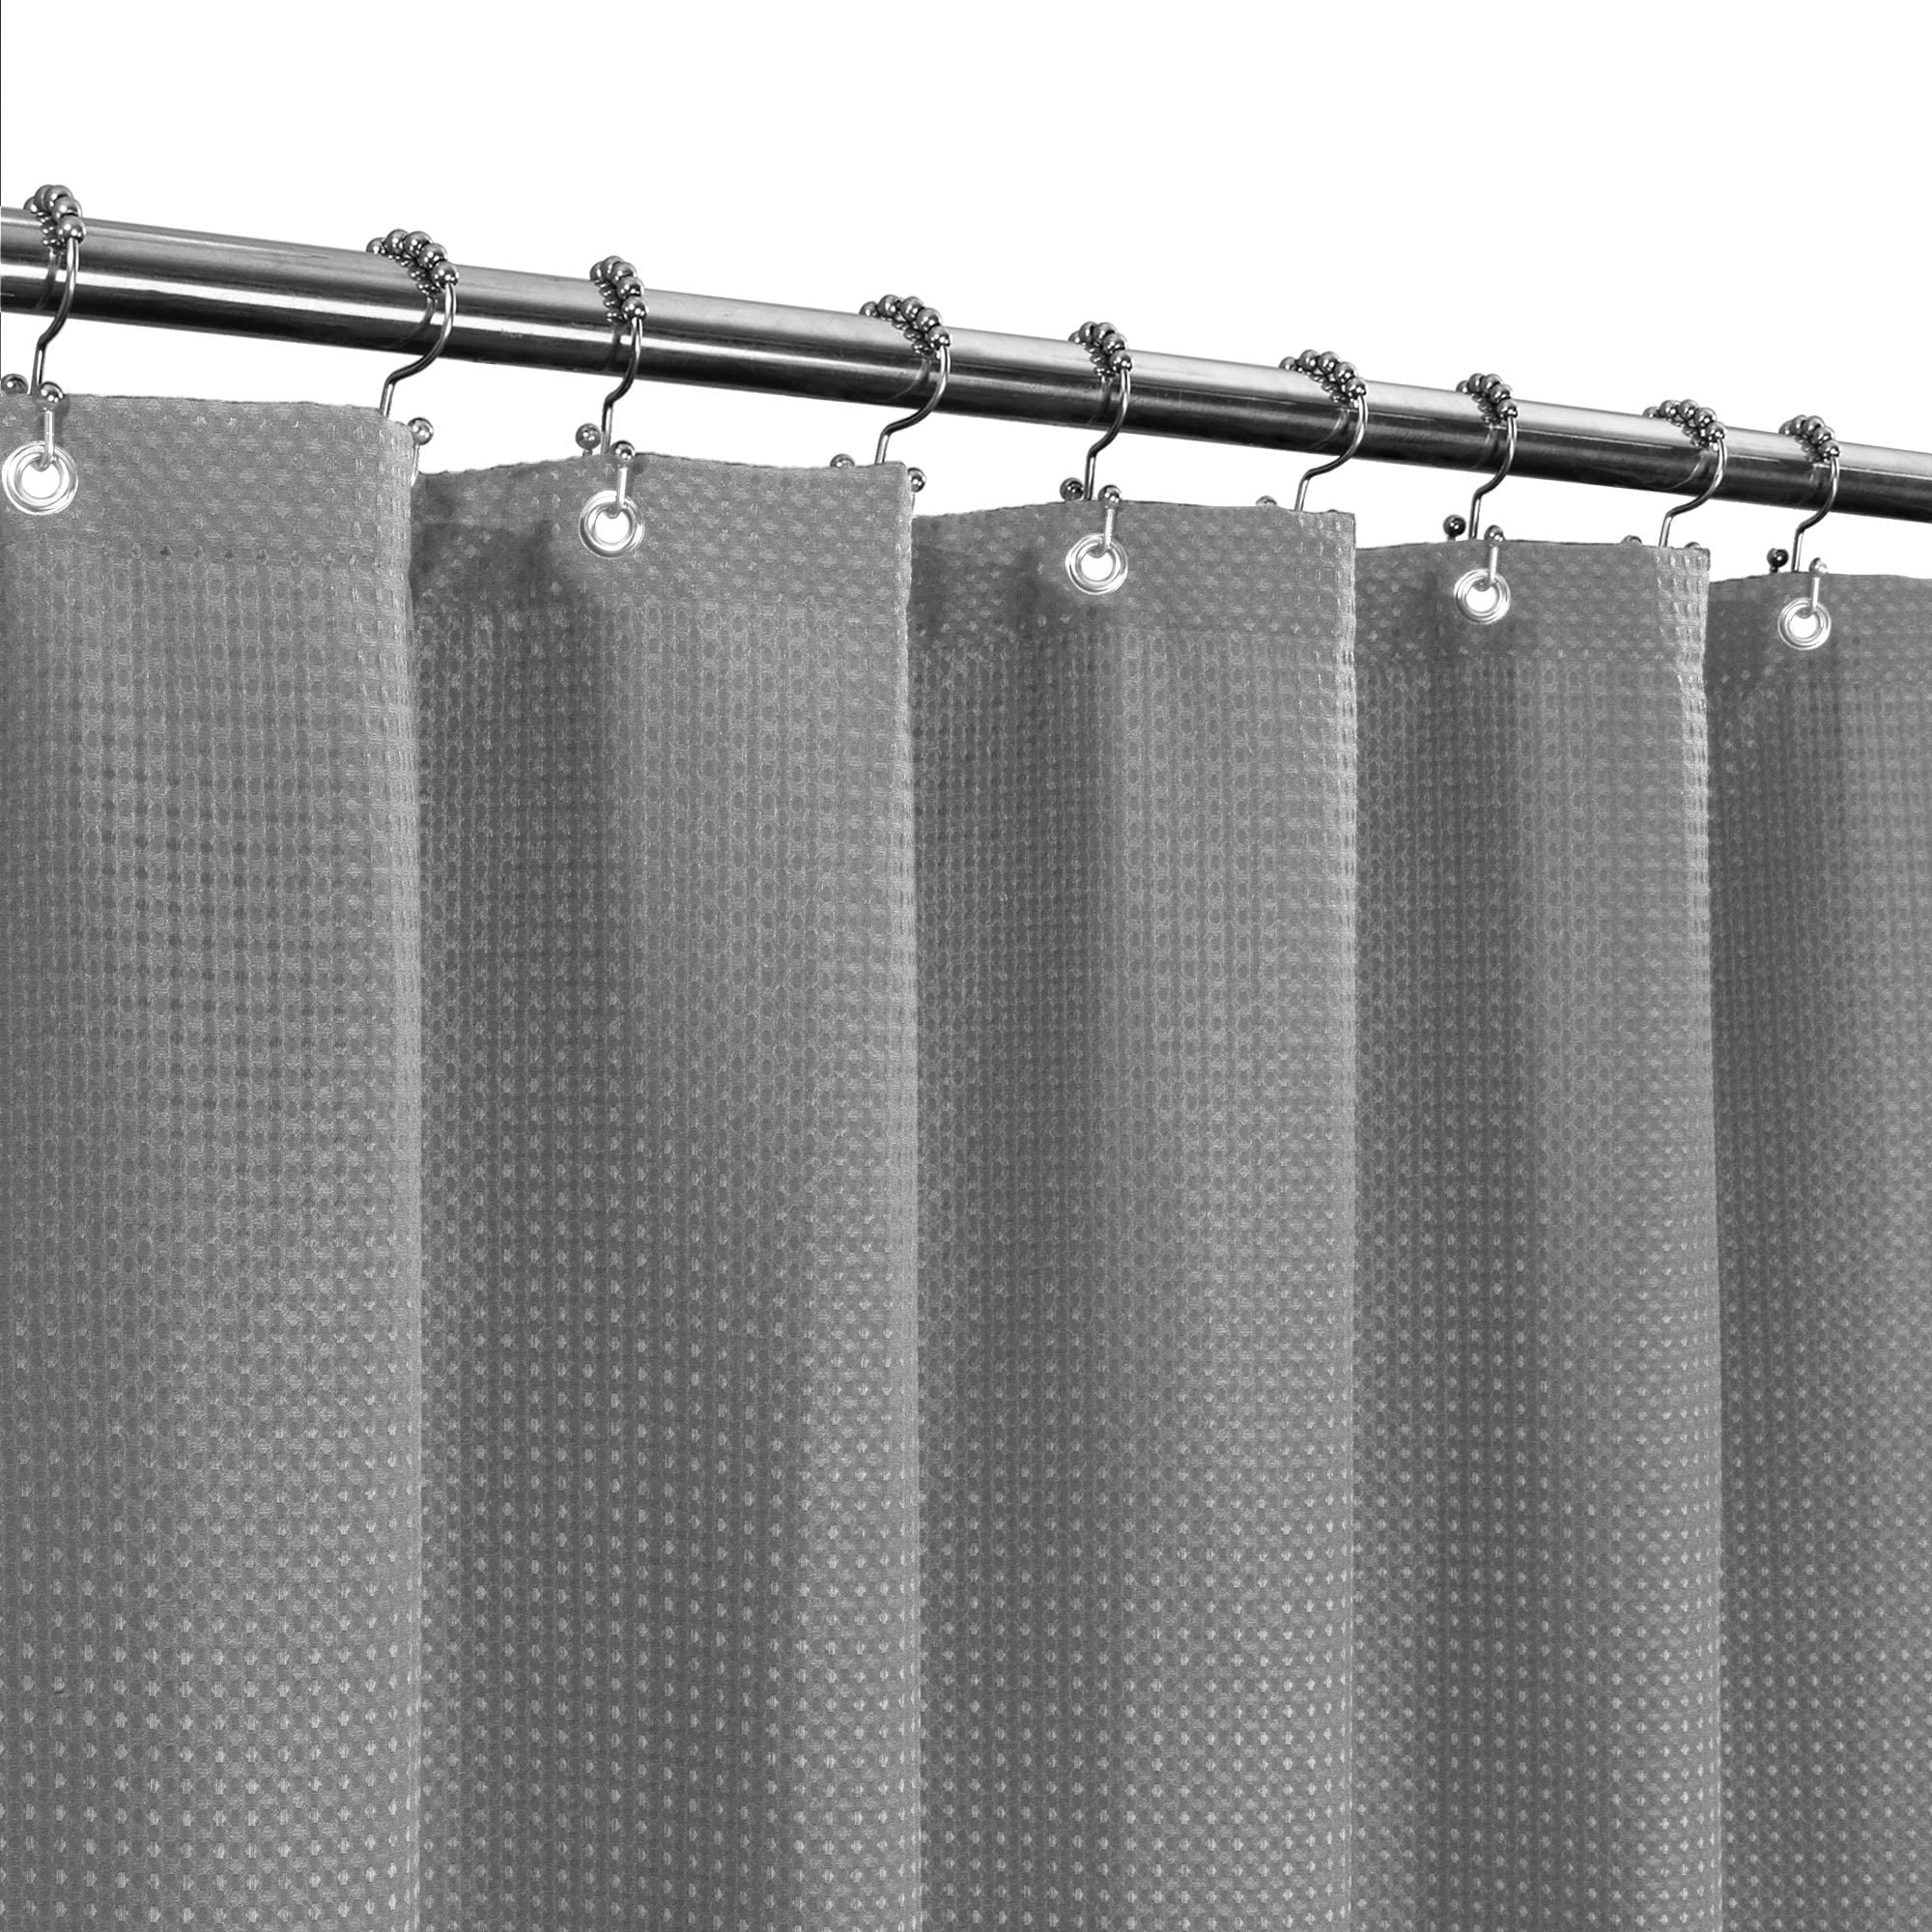 Spa Water Repellent 36x96Take a Bath White 230gsm Heavy Duty Washable Hotel Grade Stall Fabric Shower Curtain Waffle Weave 36 x 96 inches Extra Long Size